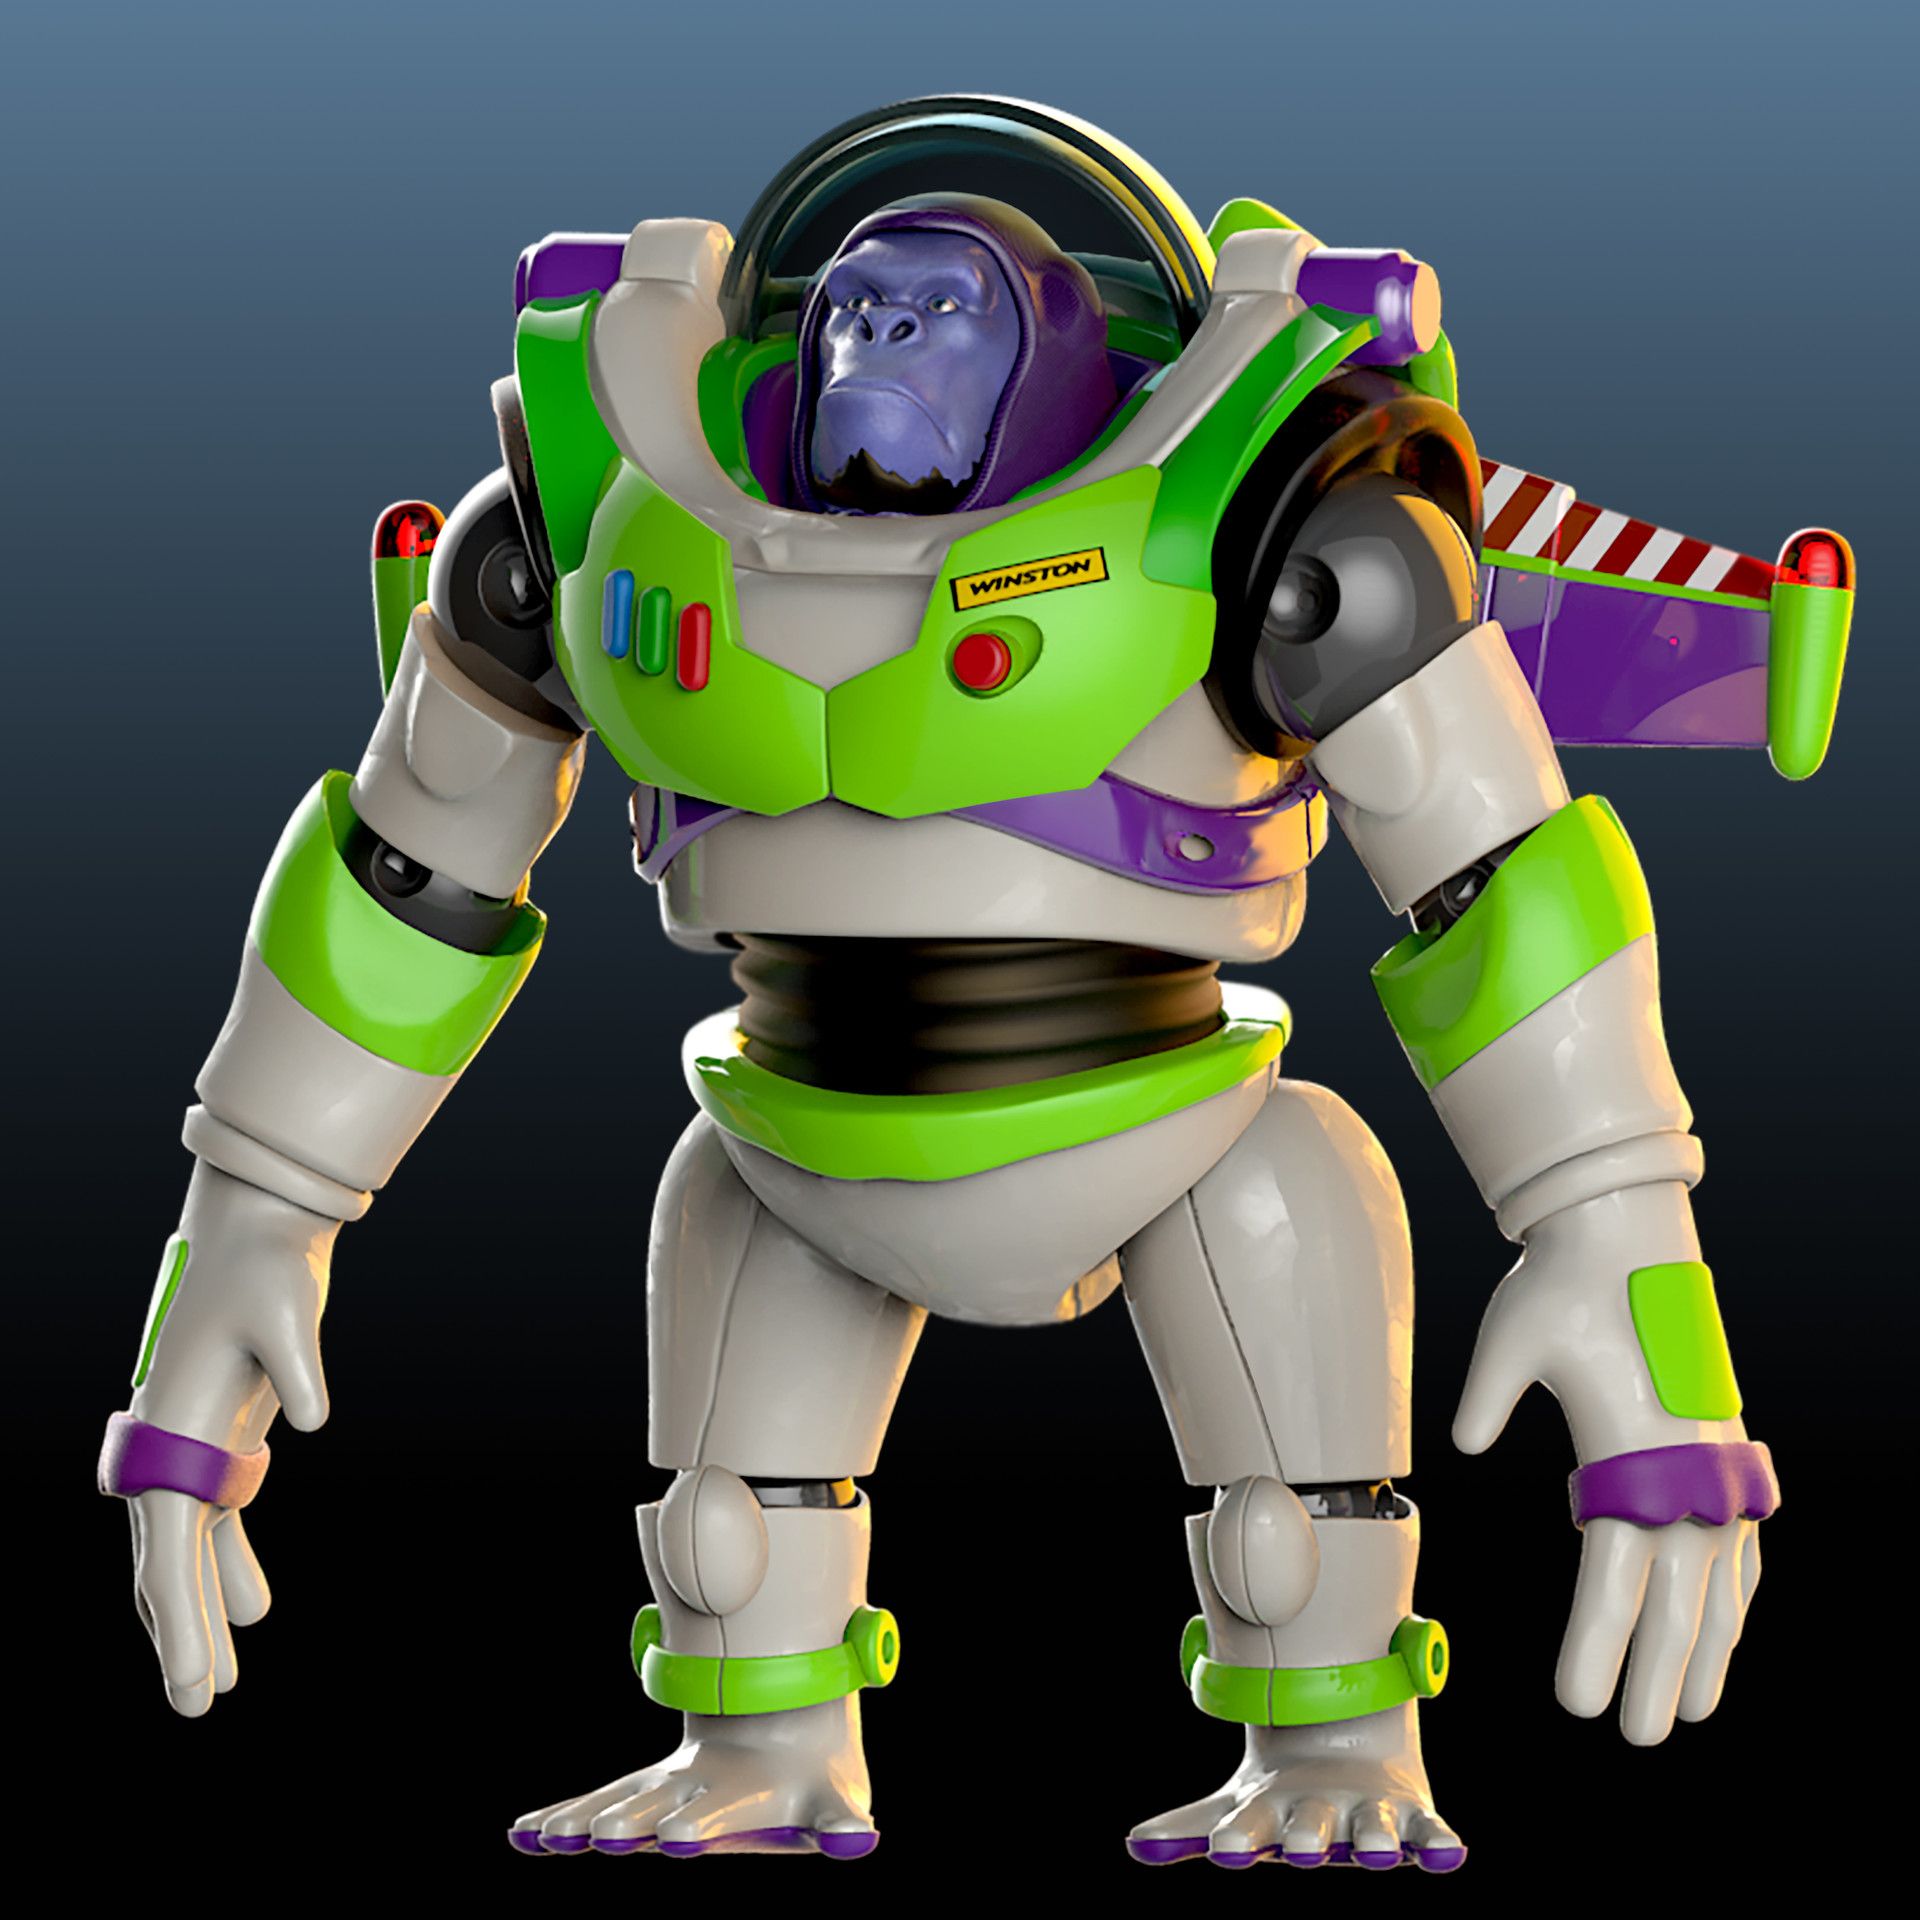 “Winston X Buzz Lightyear crossover by JEON YOUNG HAN (https://t.co/Hmu6VcA...